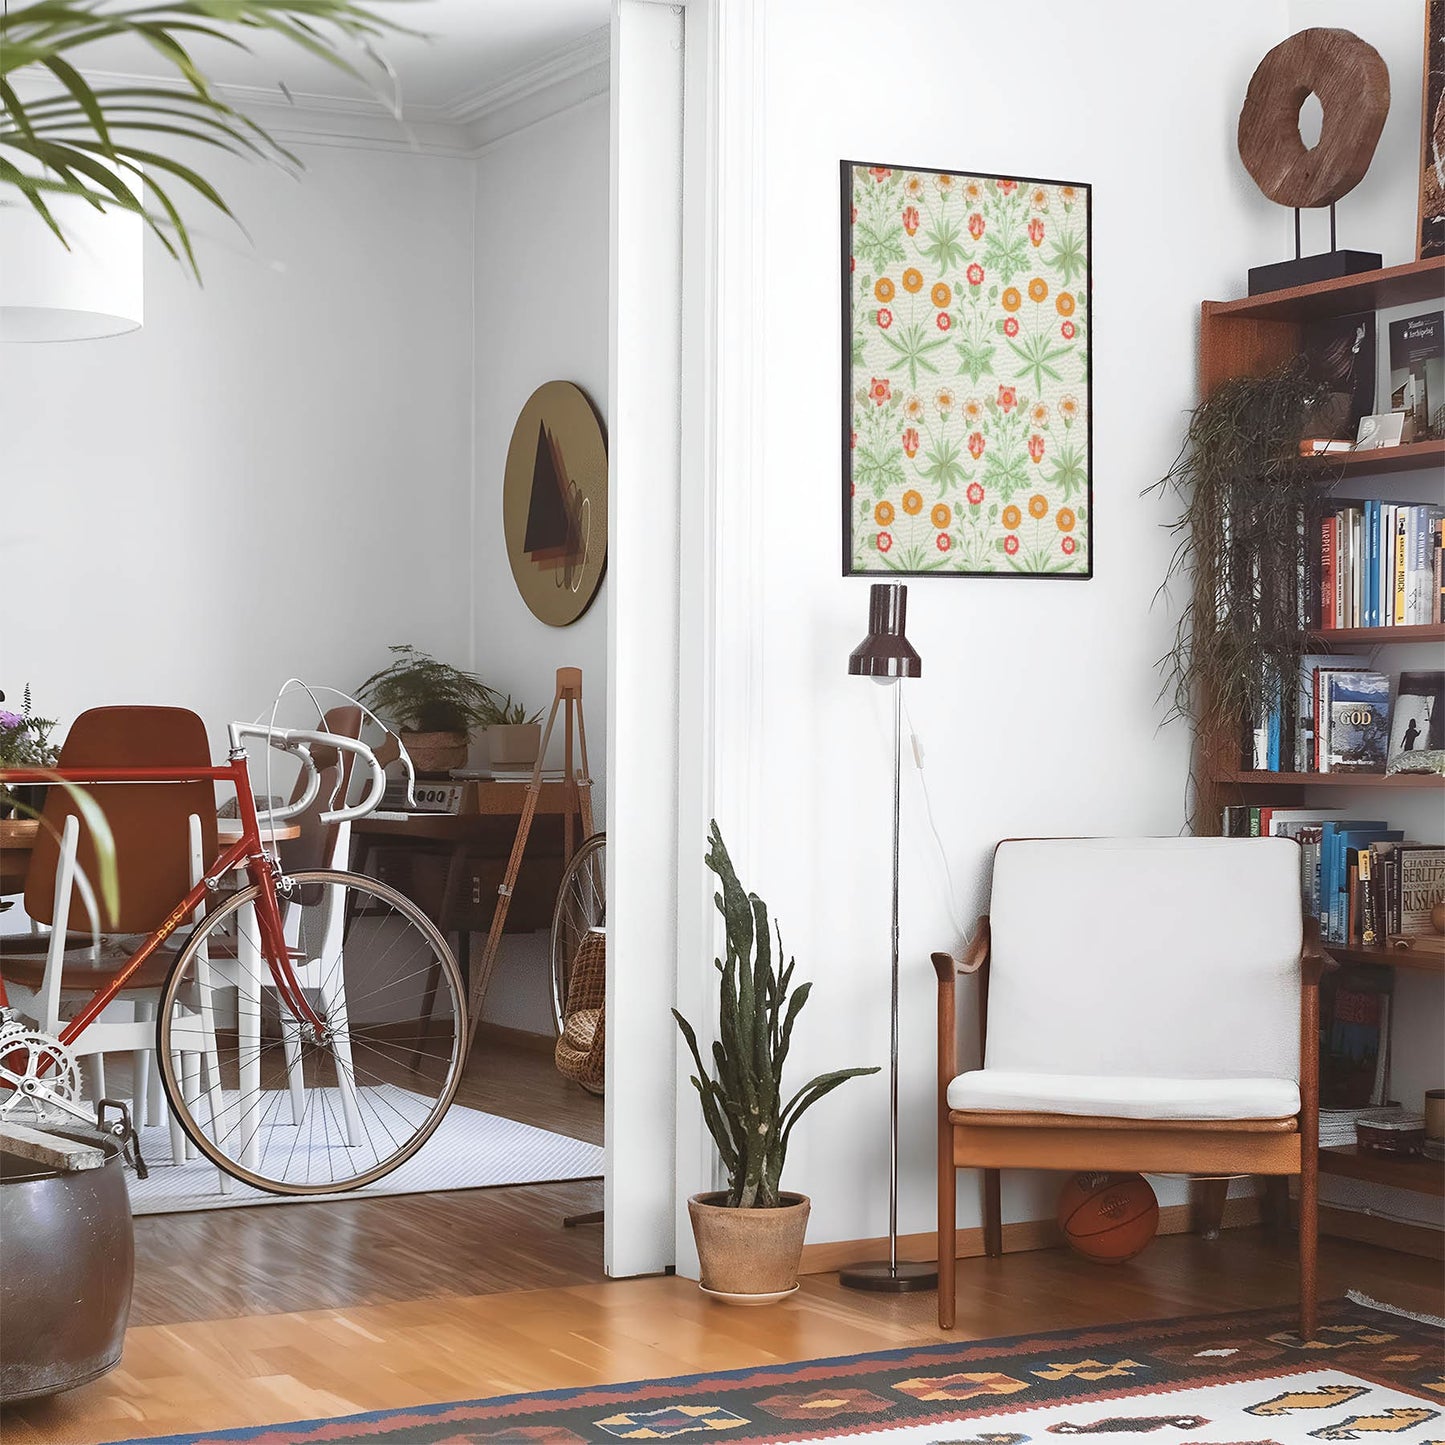 Eclectic living room with a road bike, bookshelf and house plants that features framed artwork of a Light Water Color Floral above a chair and lamp